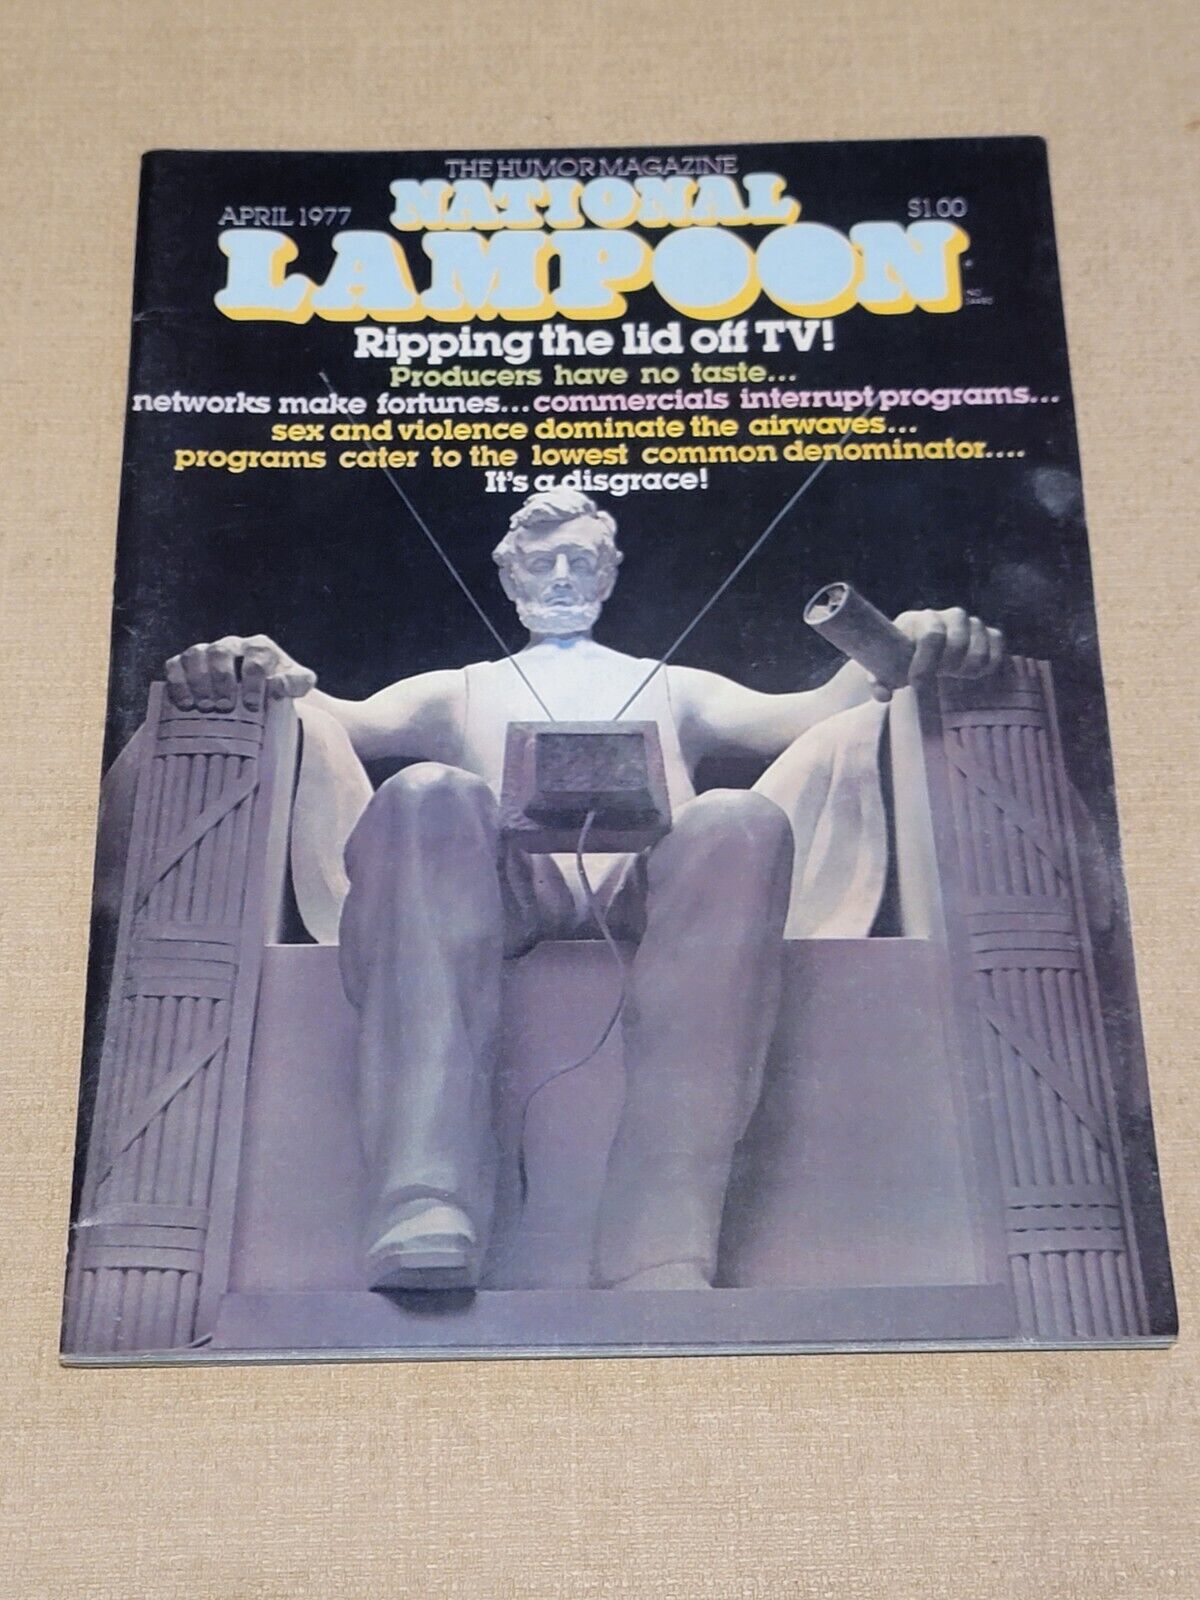 National Lampoon Magazine April 1977 Ripping Lid Off TV Issue Humor Satire VTG